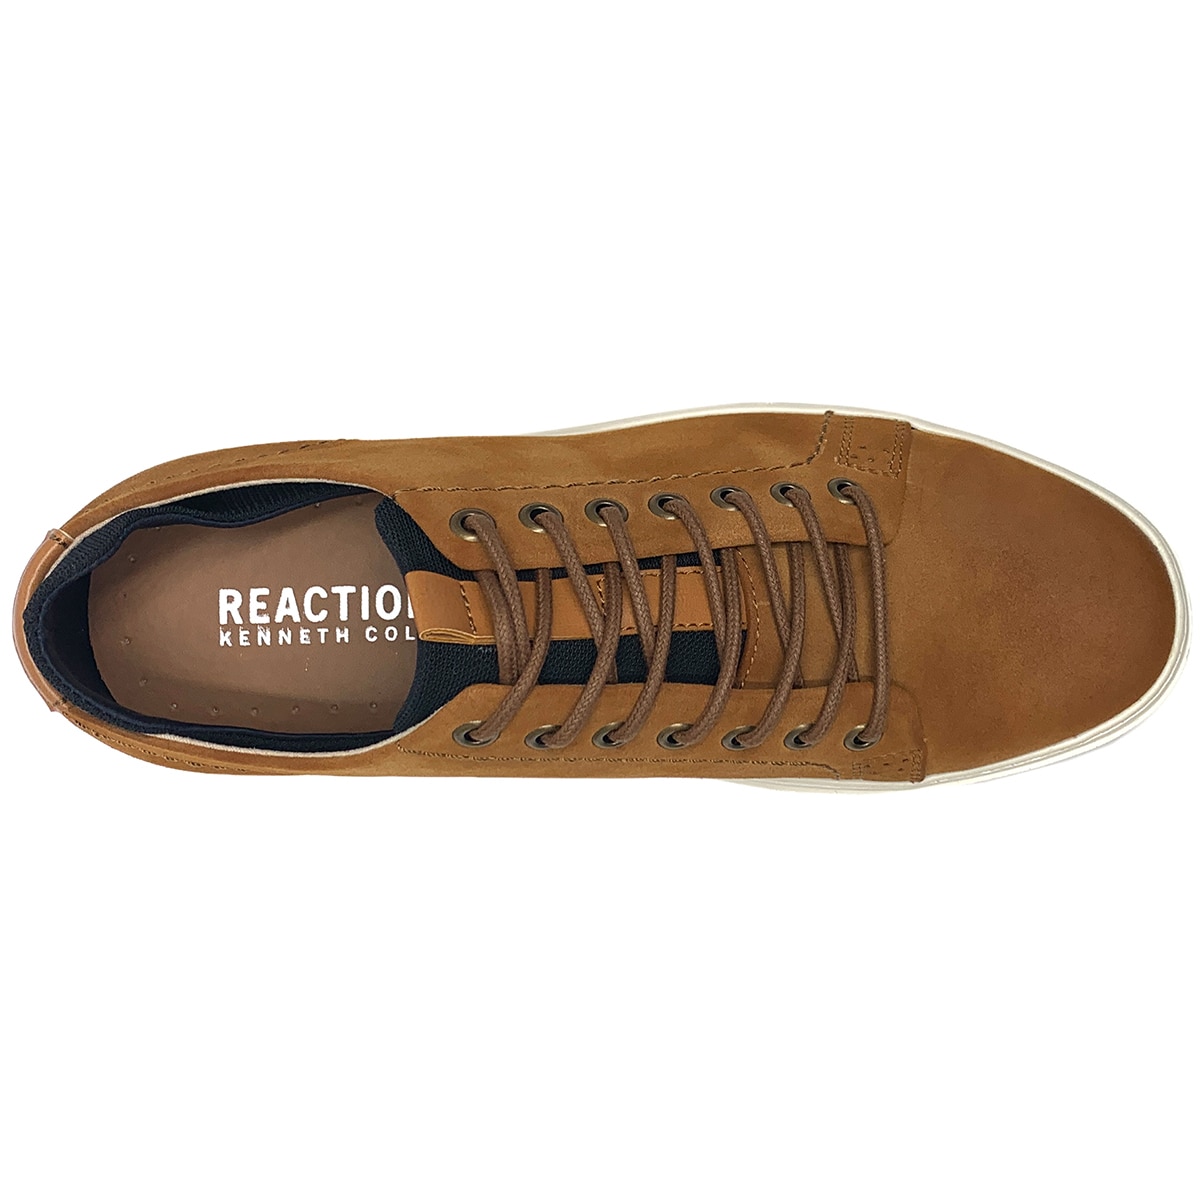 Kenneth Cole Indy Sneaker - Tan